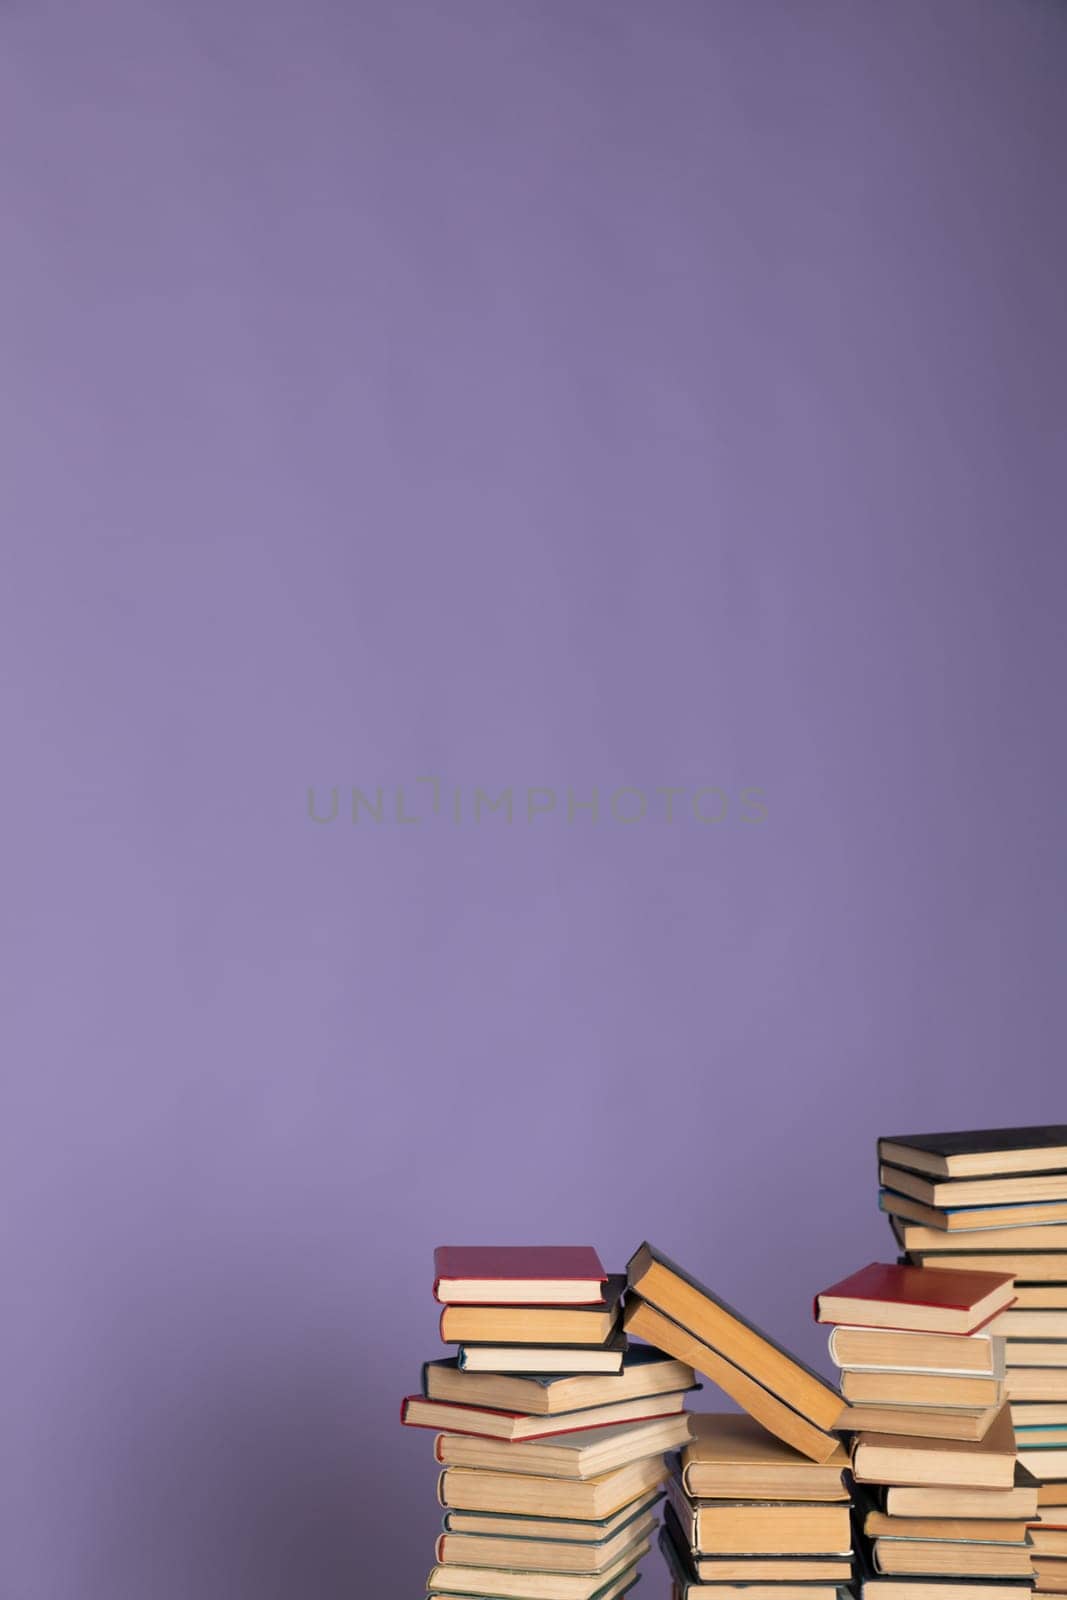 a stack of books in the library on a purple background training education science by Simakov